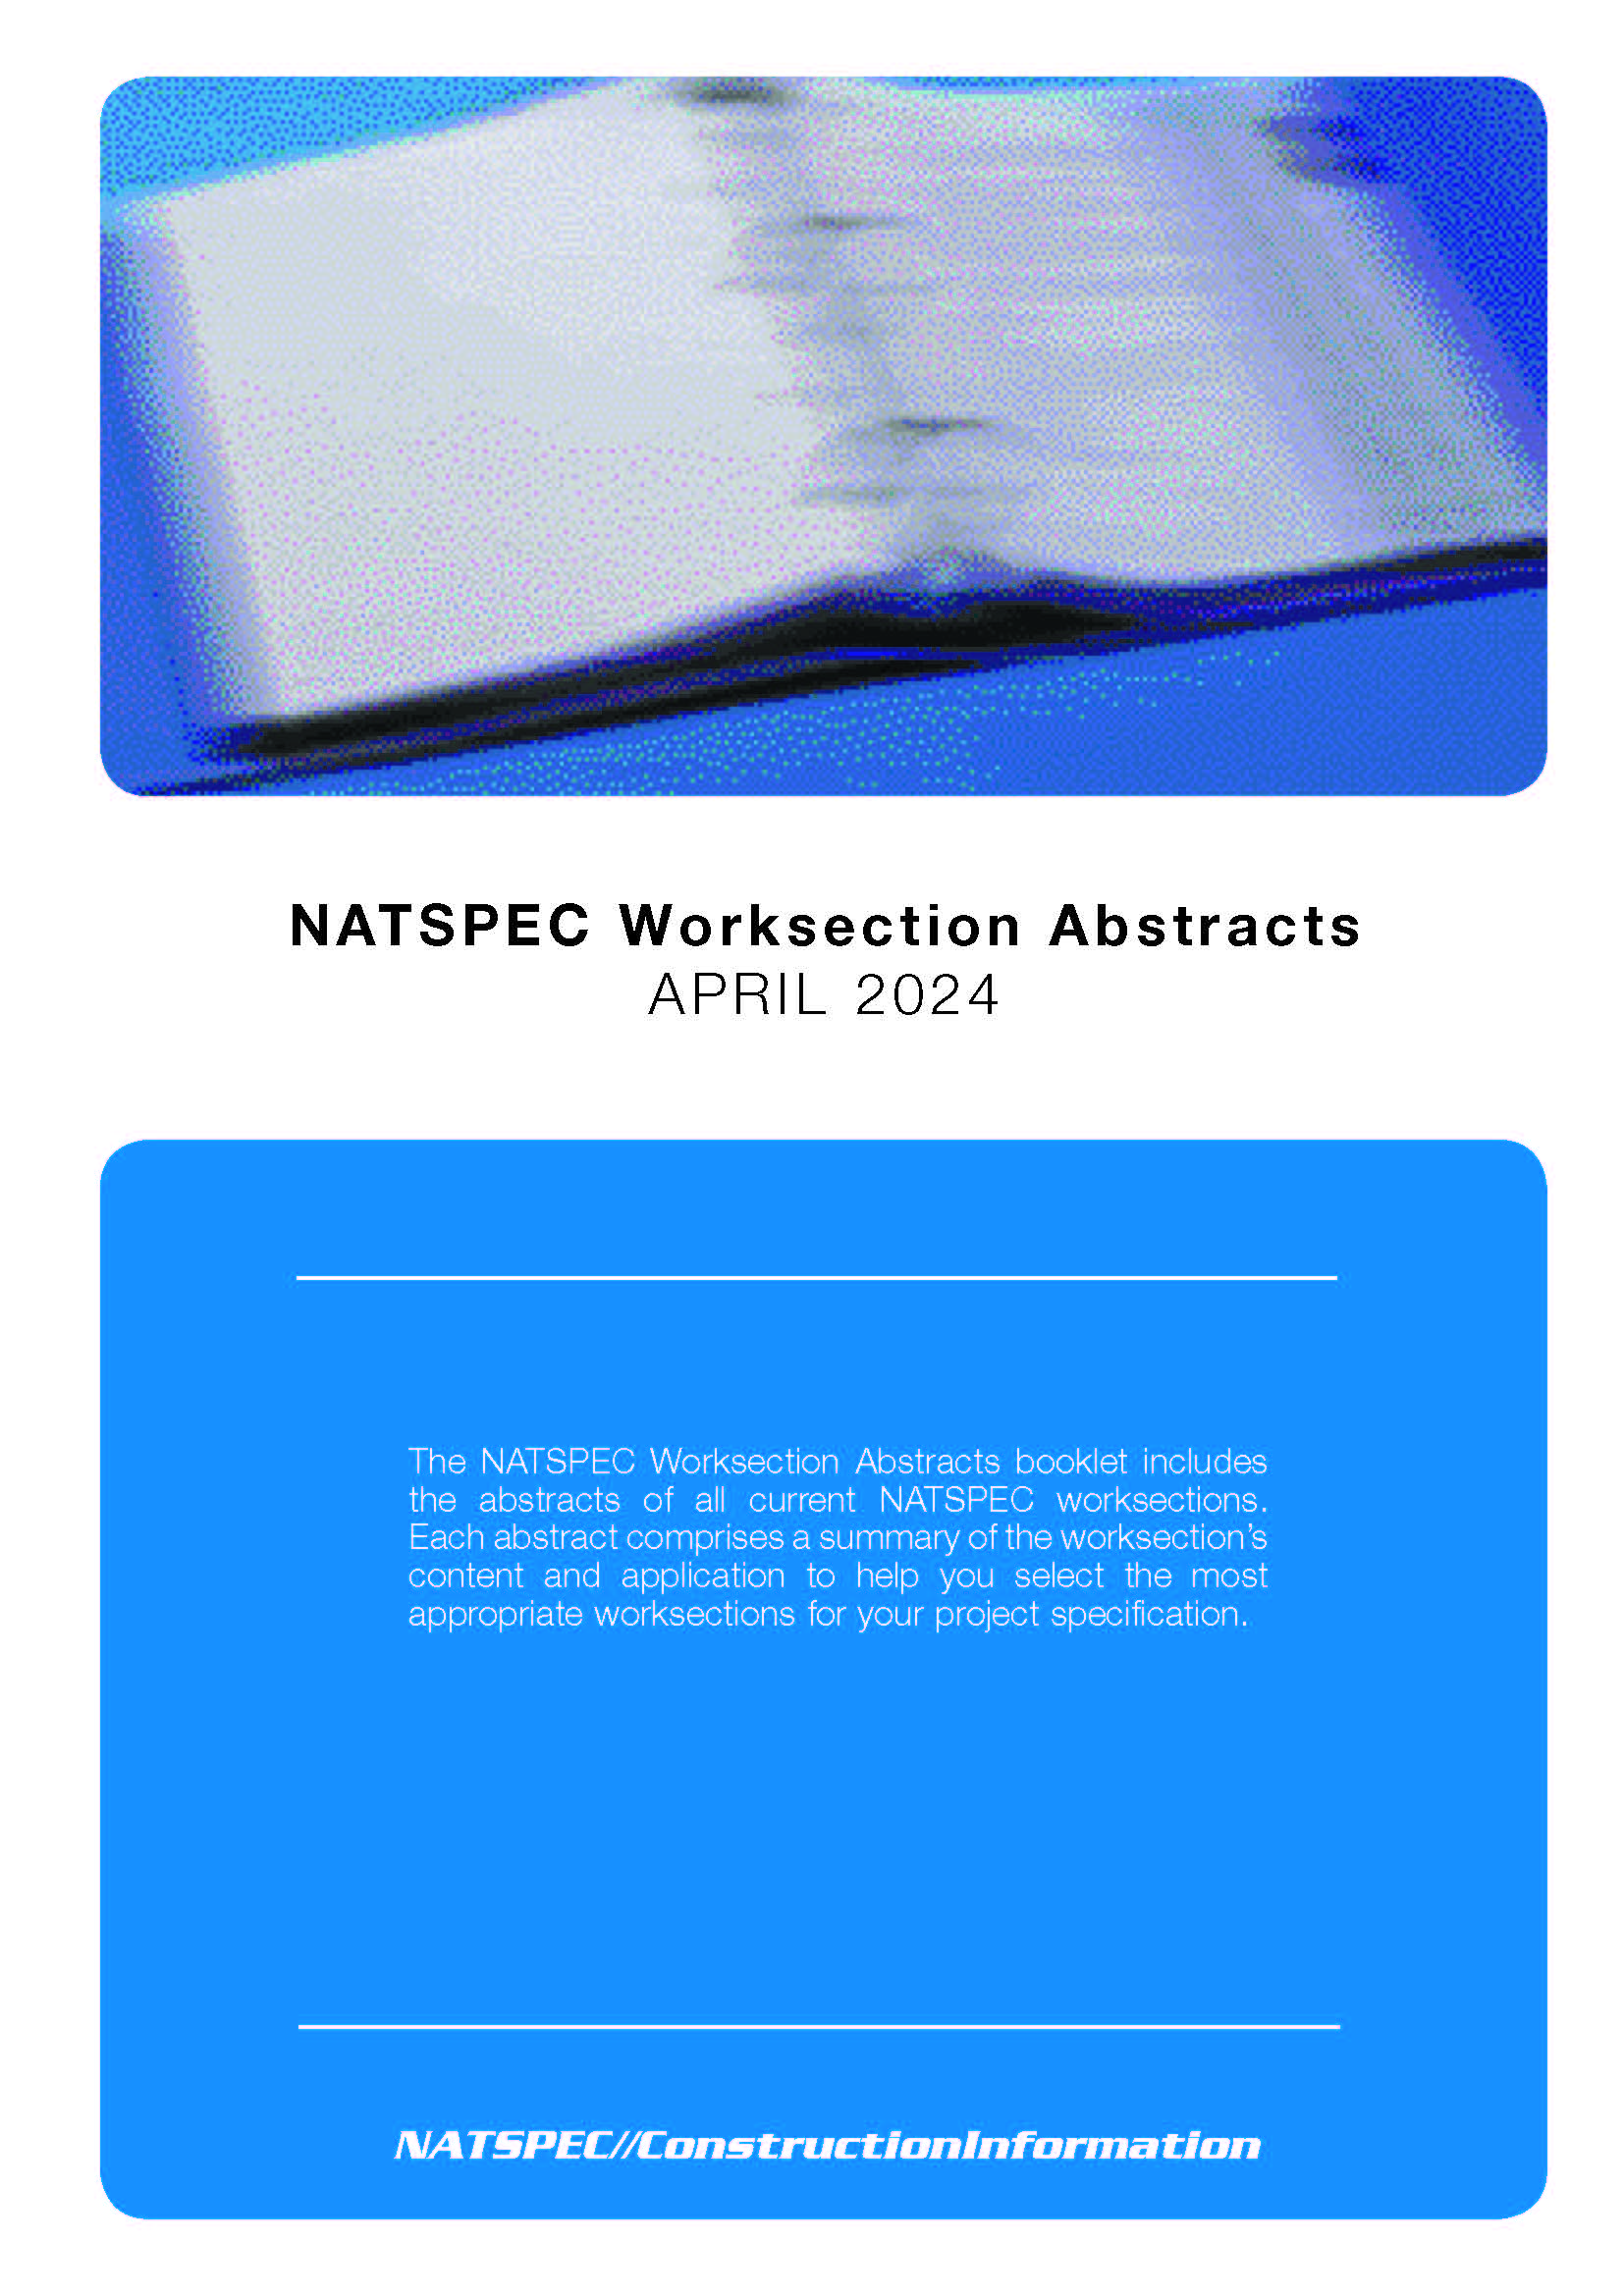 NATSPEC Worksection Abstracts